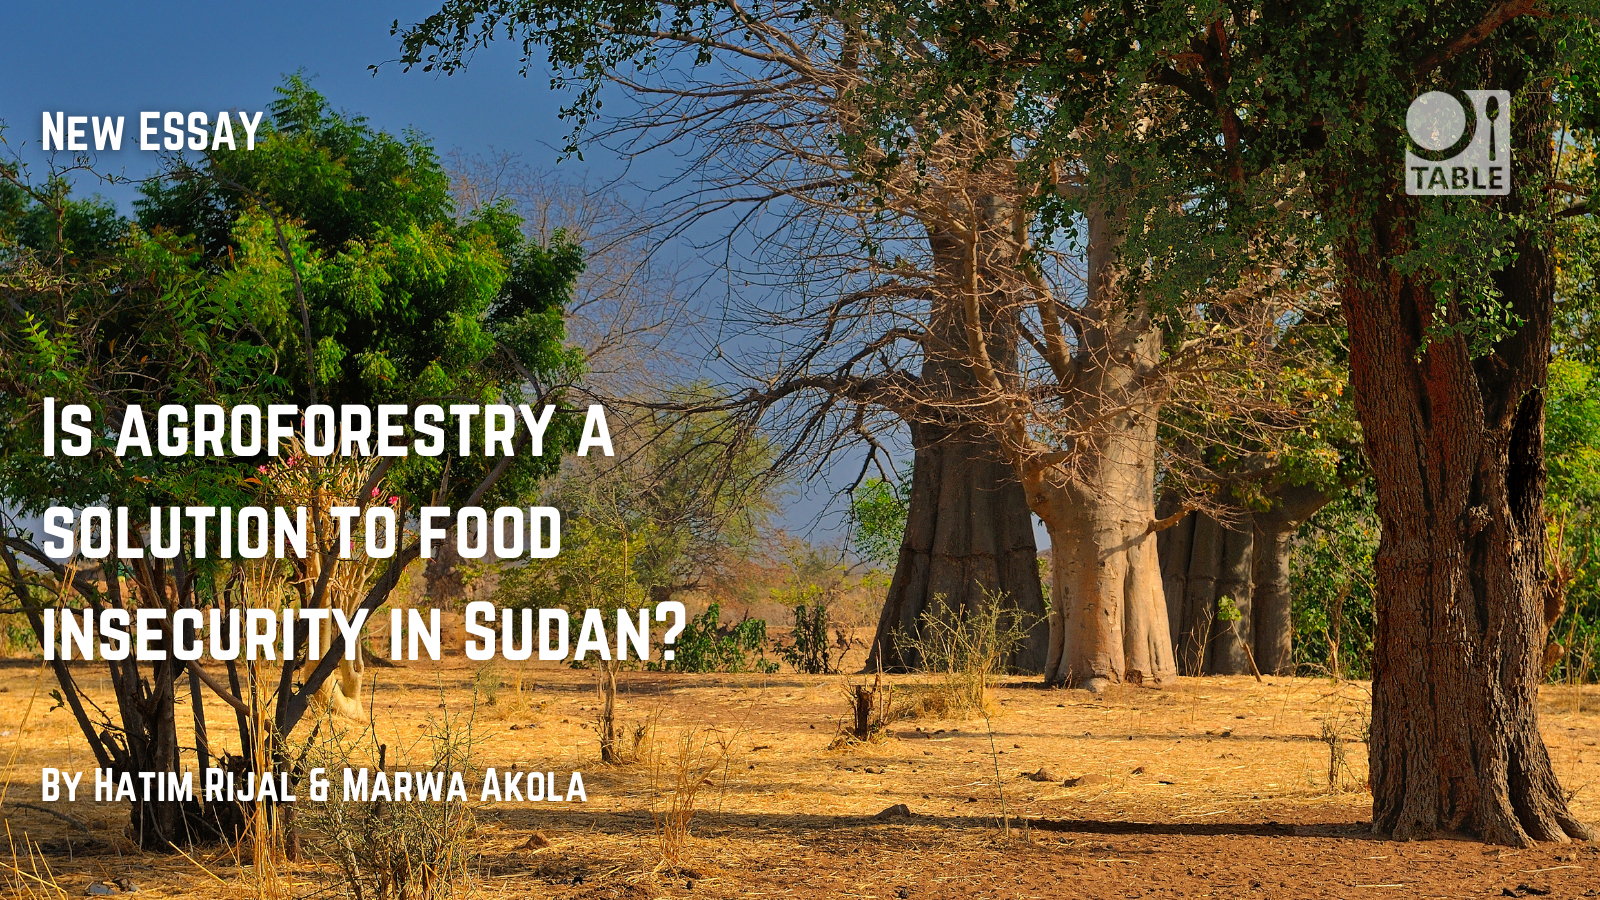 A new essay on the TABLE website titled "Is agroforestry a solution to food insecurity in Sudan?" by Hatim Rijal and Marwa Akola. The background image is a stand of trees in Sudan.